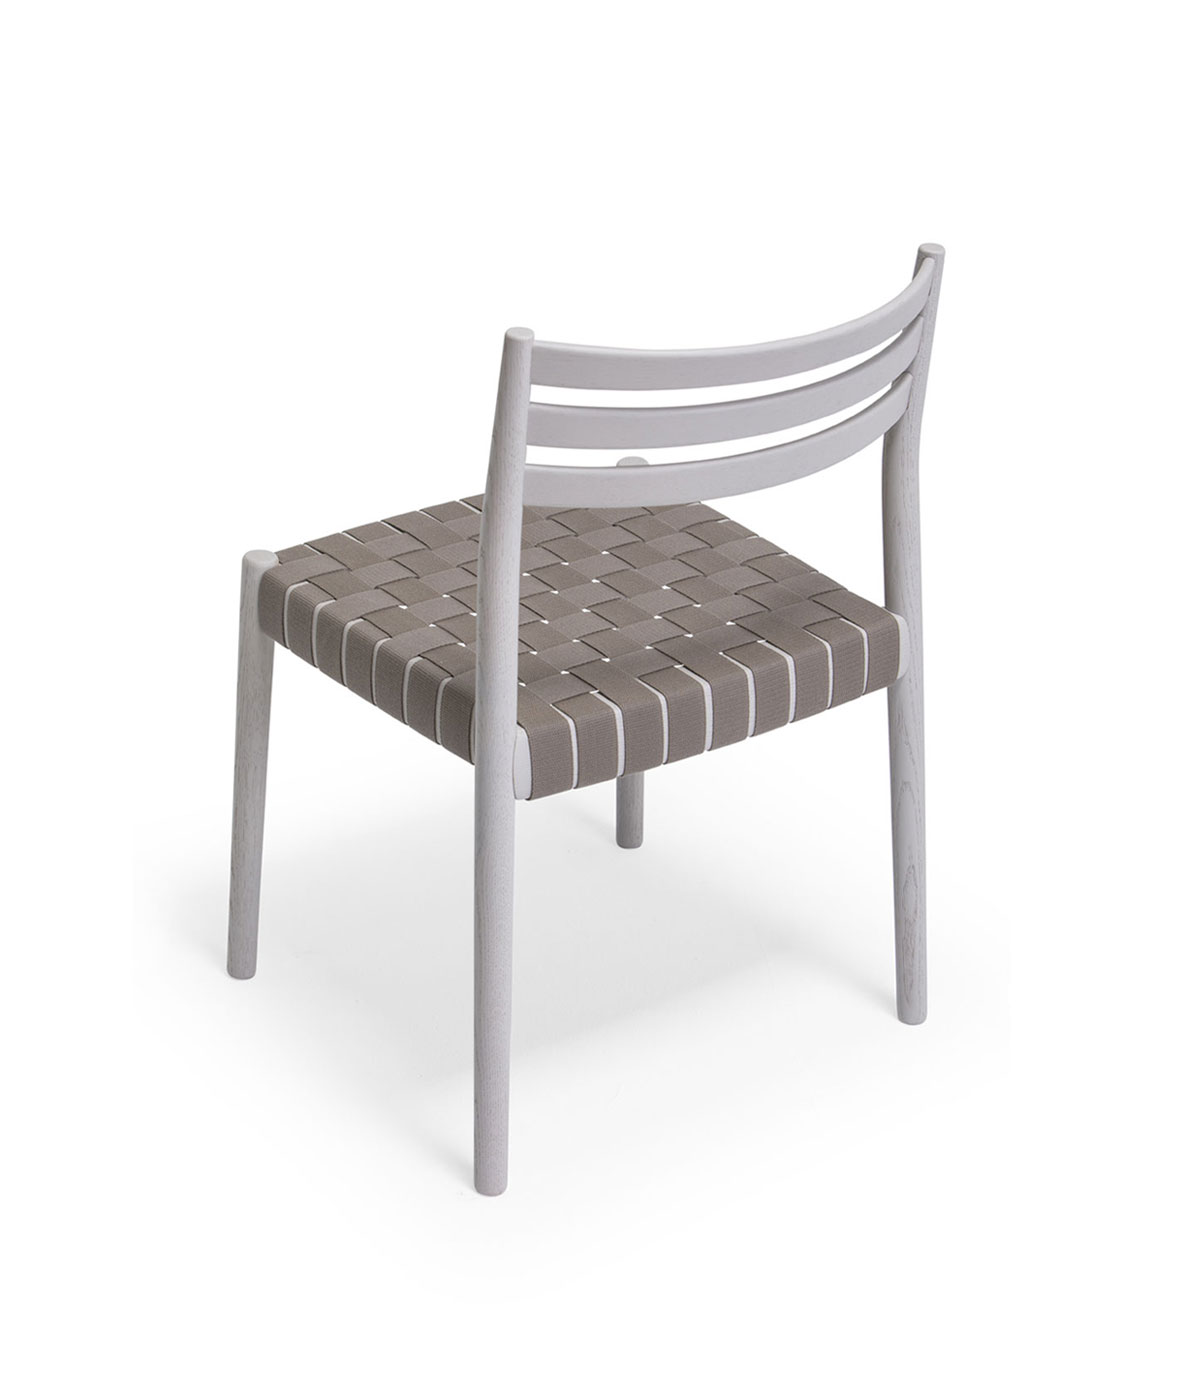 Bogart chair with woven cord seat - Vergés